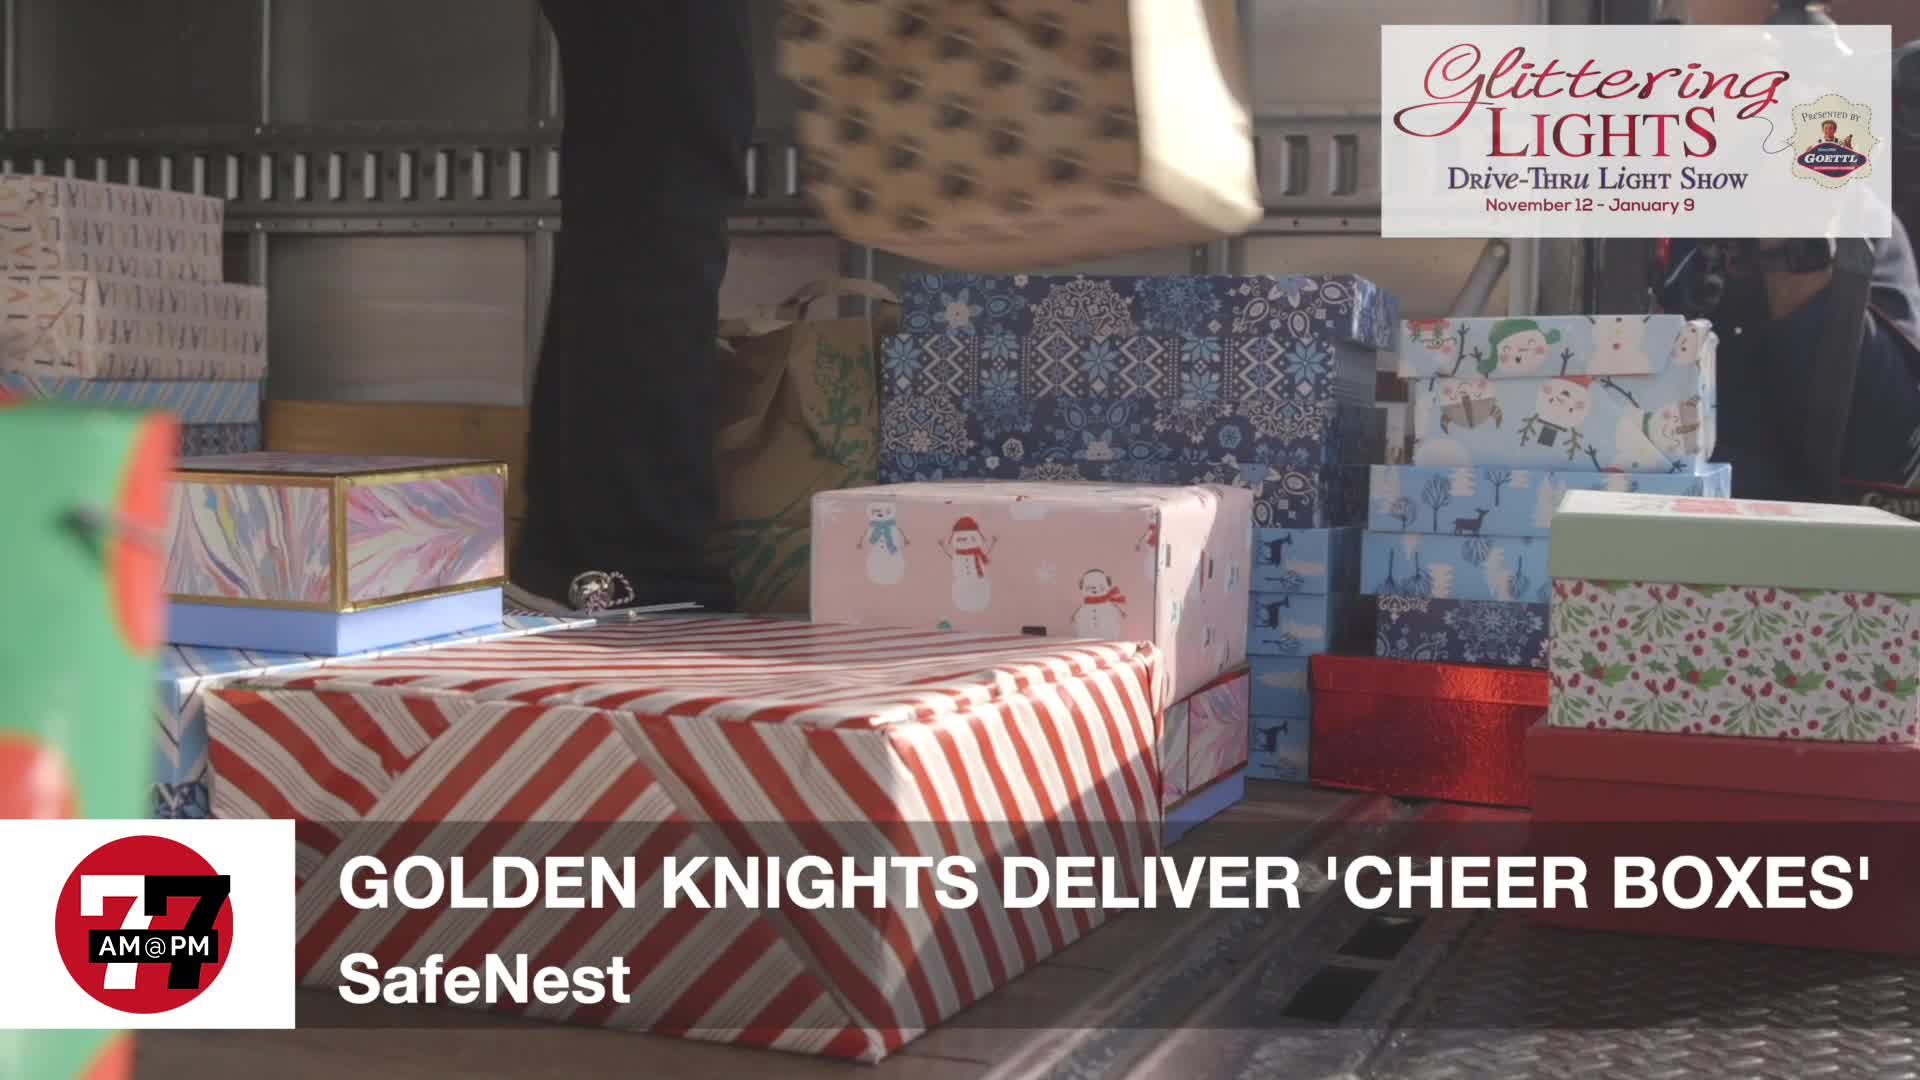 7@7PM Golden Knights Deliver ‘Cheer Boxes’